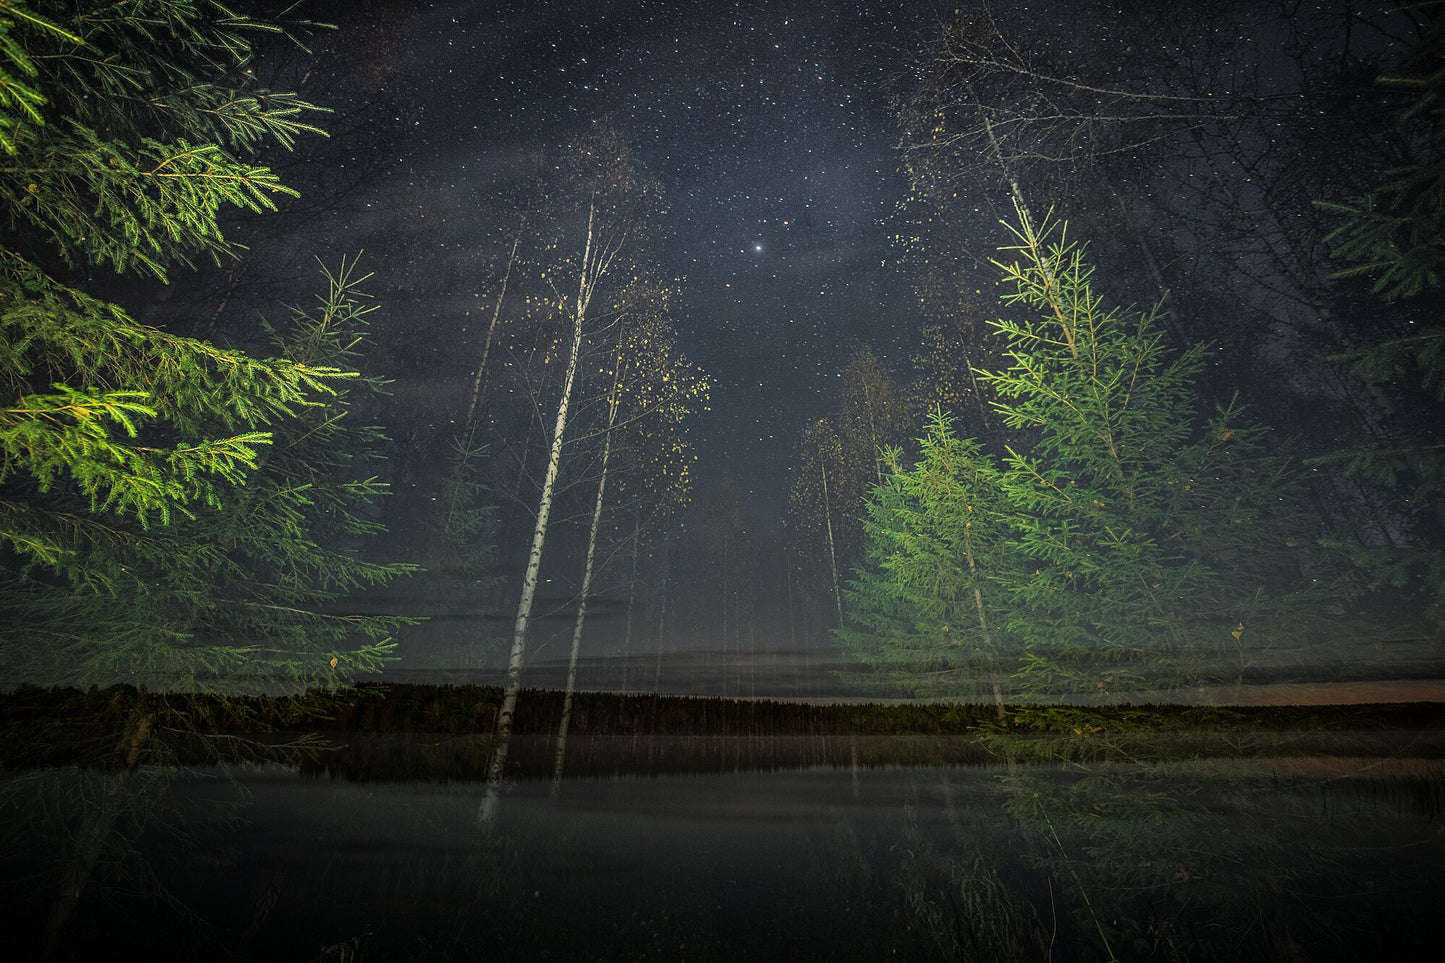 Double exposure of autumnal forest and lake, with illuminated trees and shimmering stars.